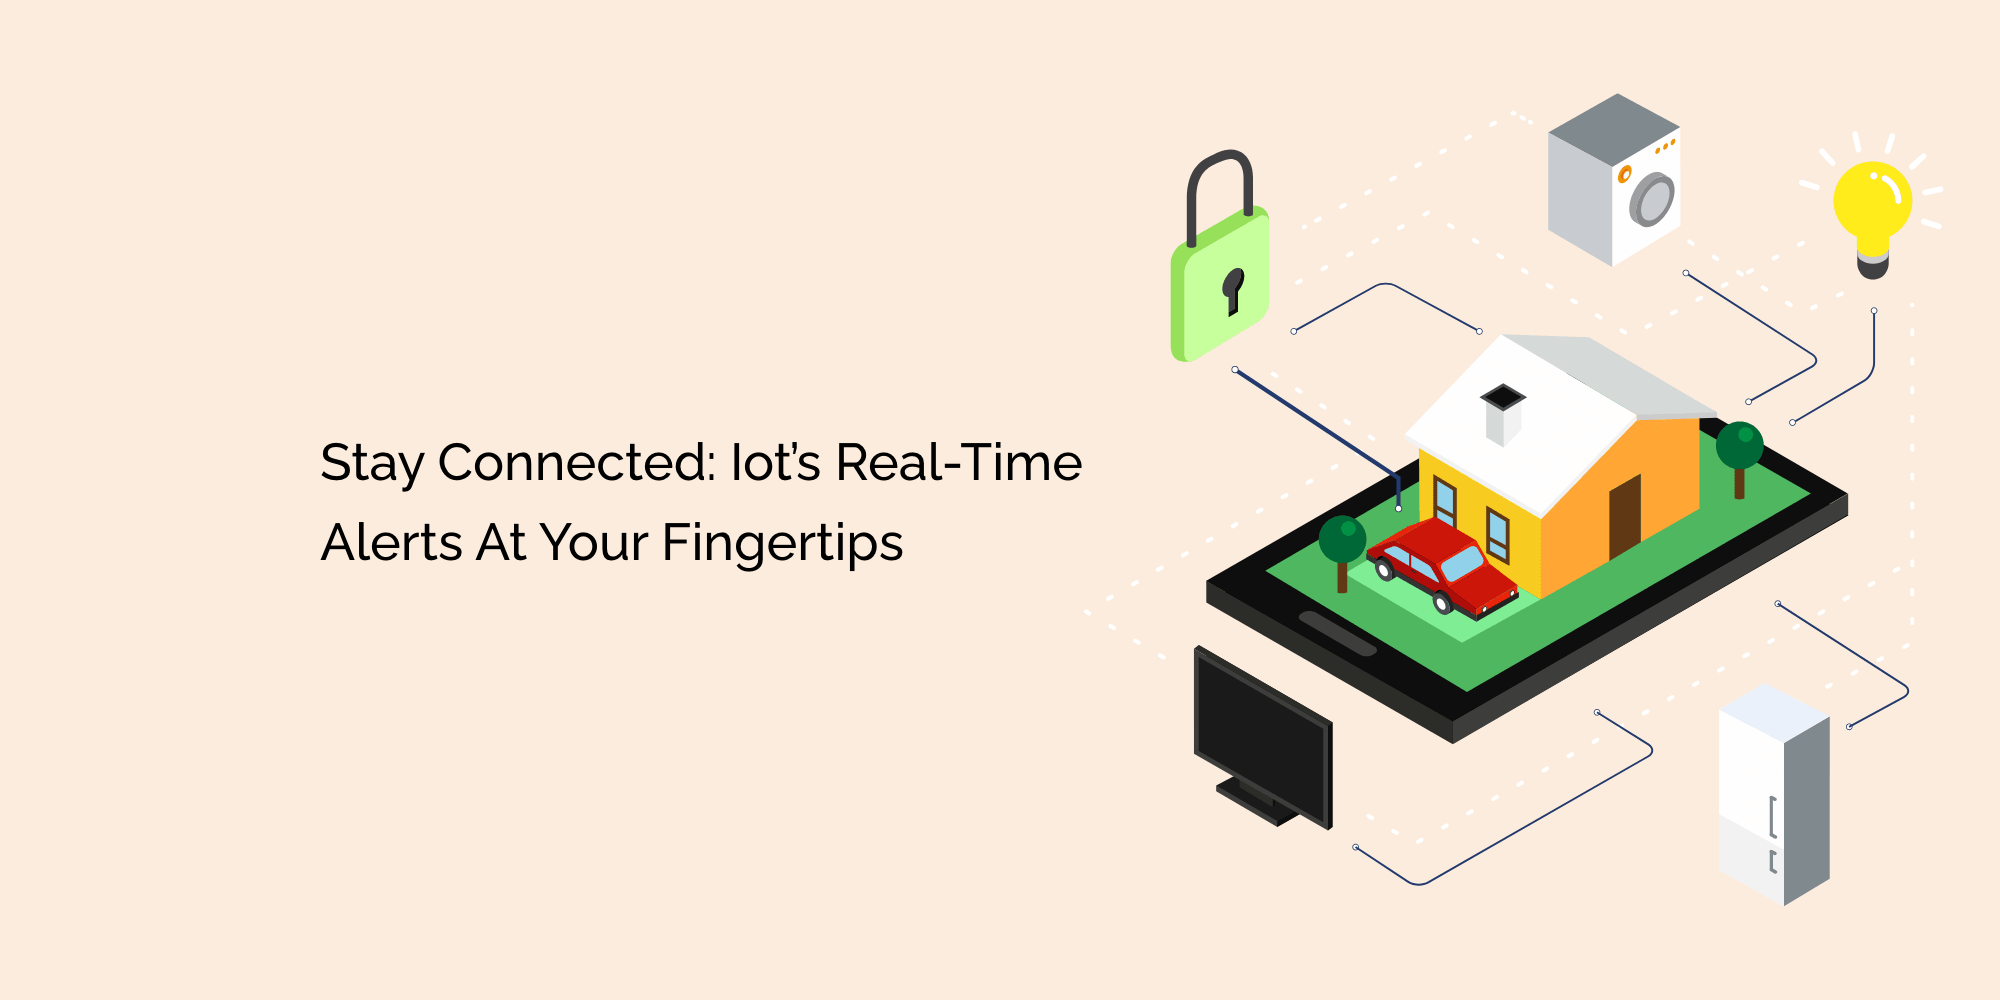 Stay Connected: IoT's Real-Time Alerts at Your Fingertips